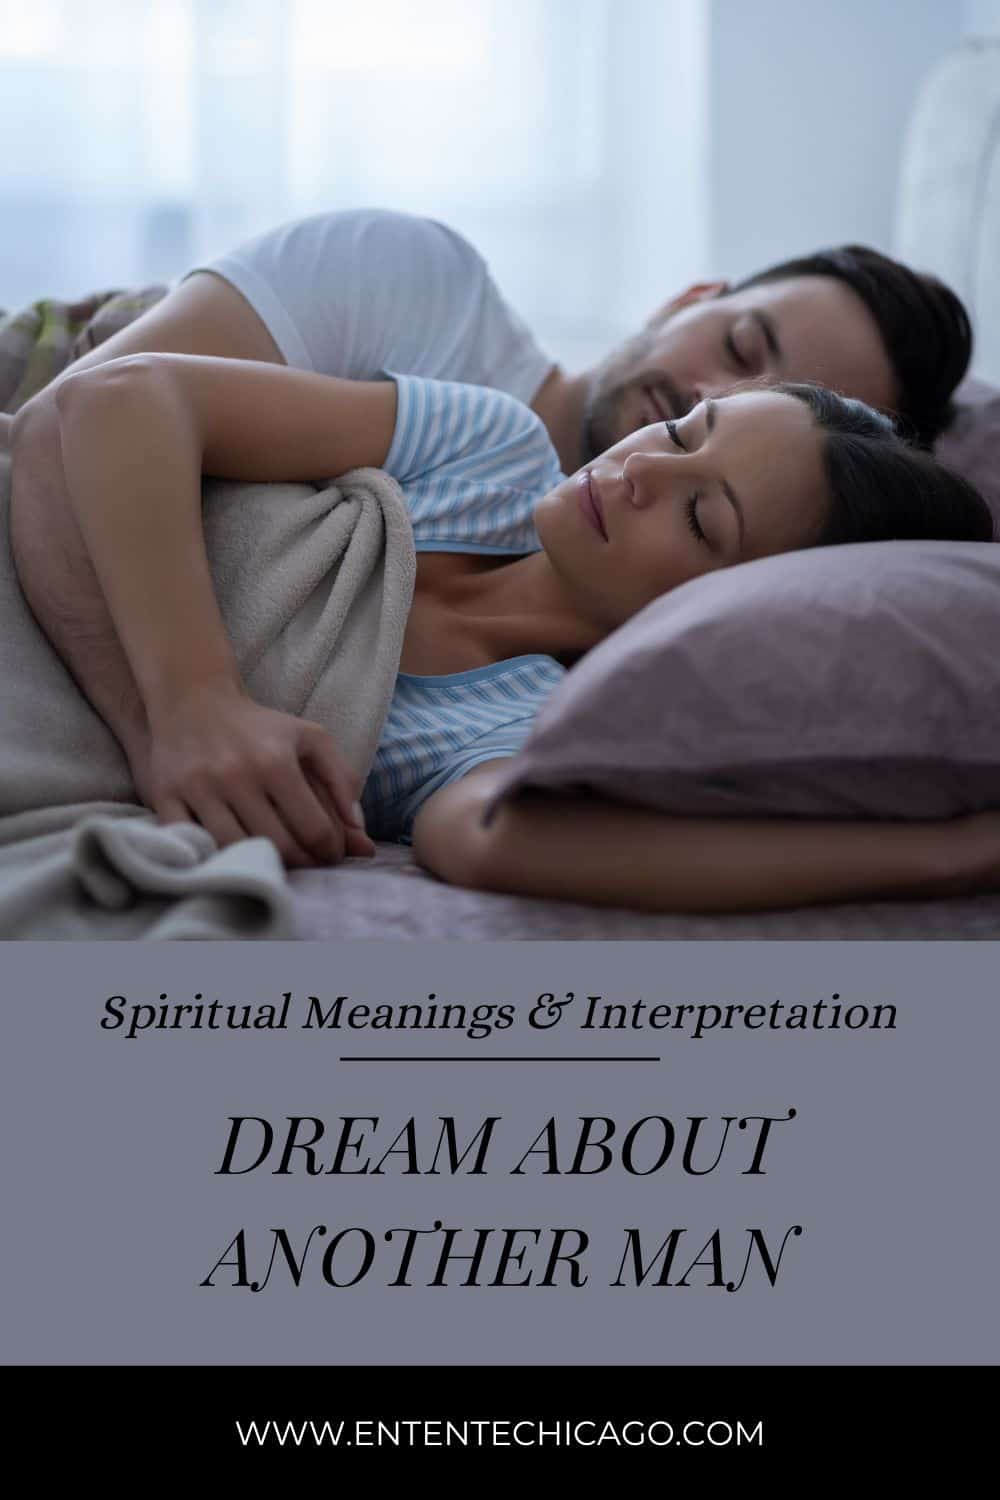 Dream About Another Man (Spiritual Meanings & Interpretation) (1)